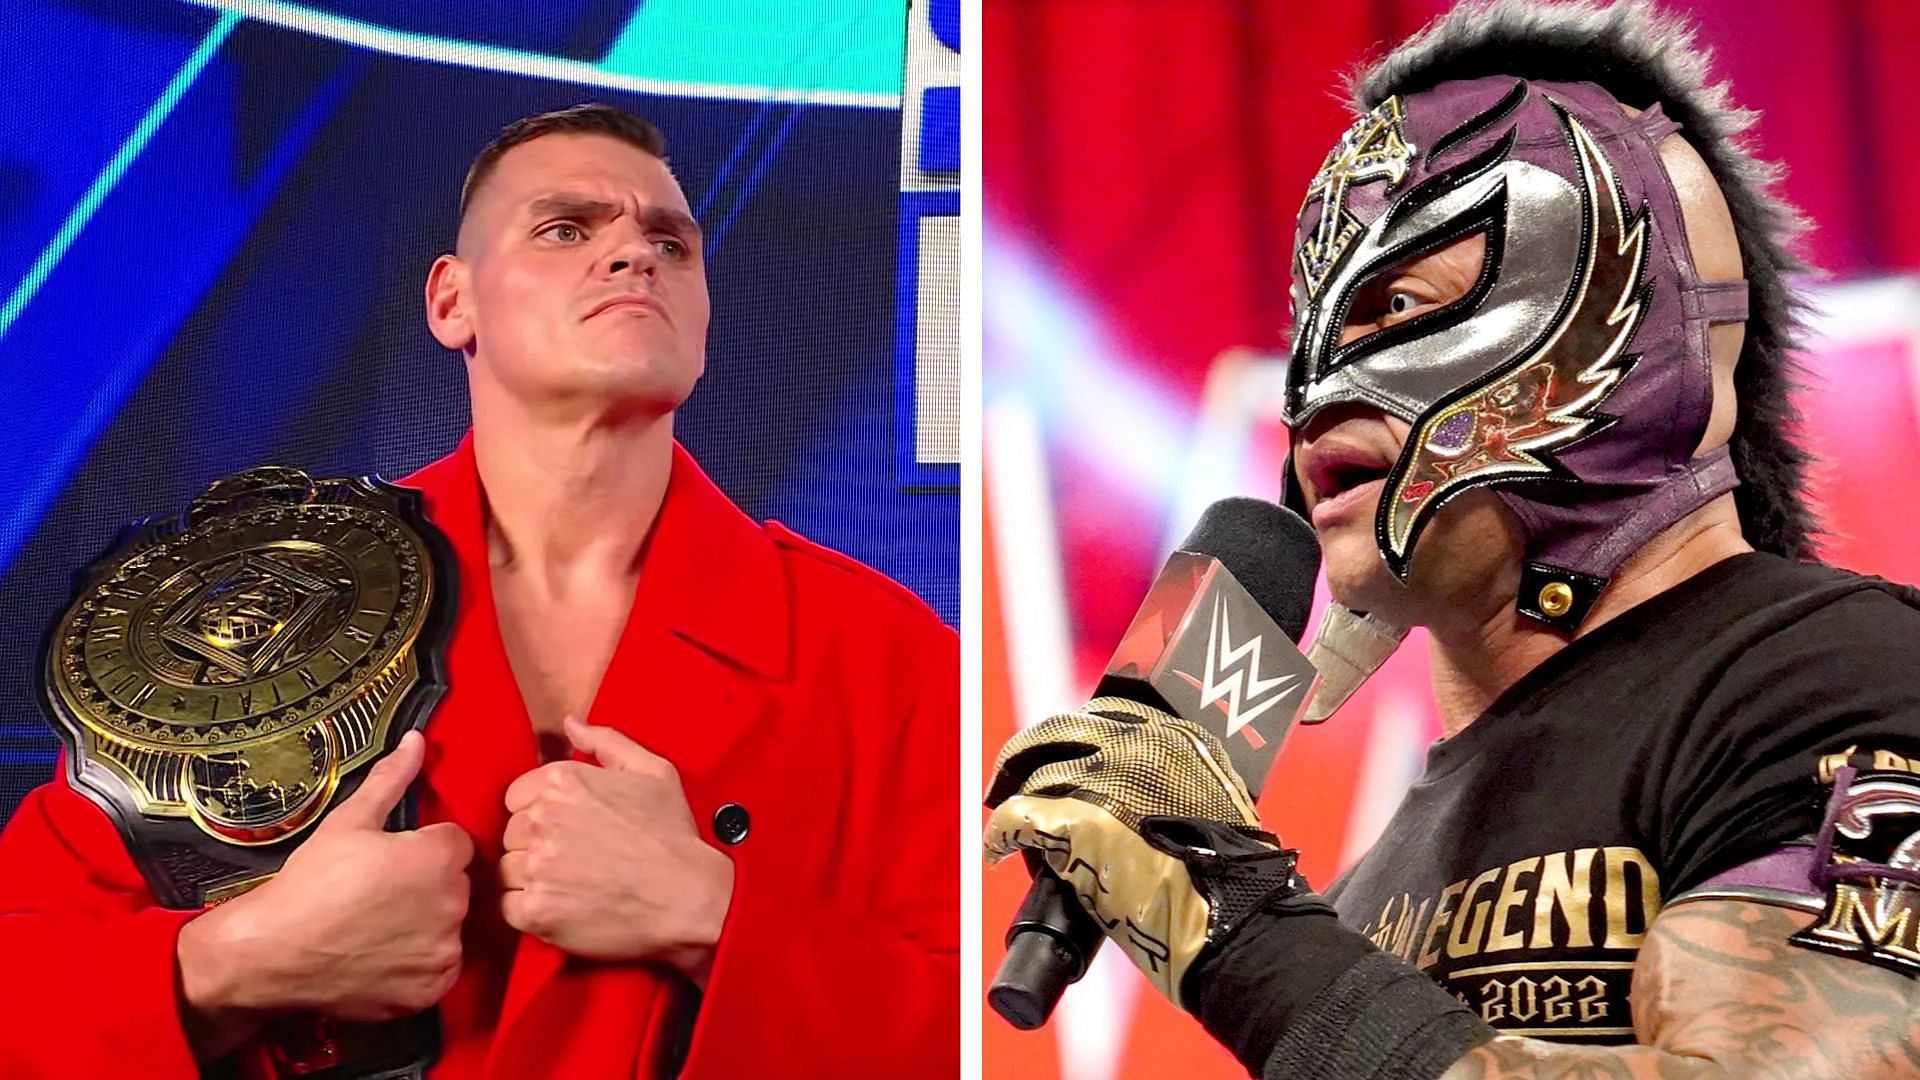 Gunther and Rey Mysterio will clash on WWE SmackDown